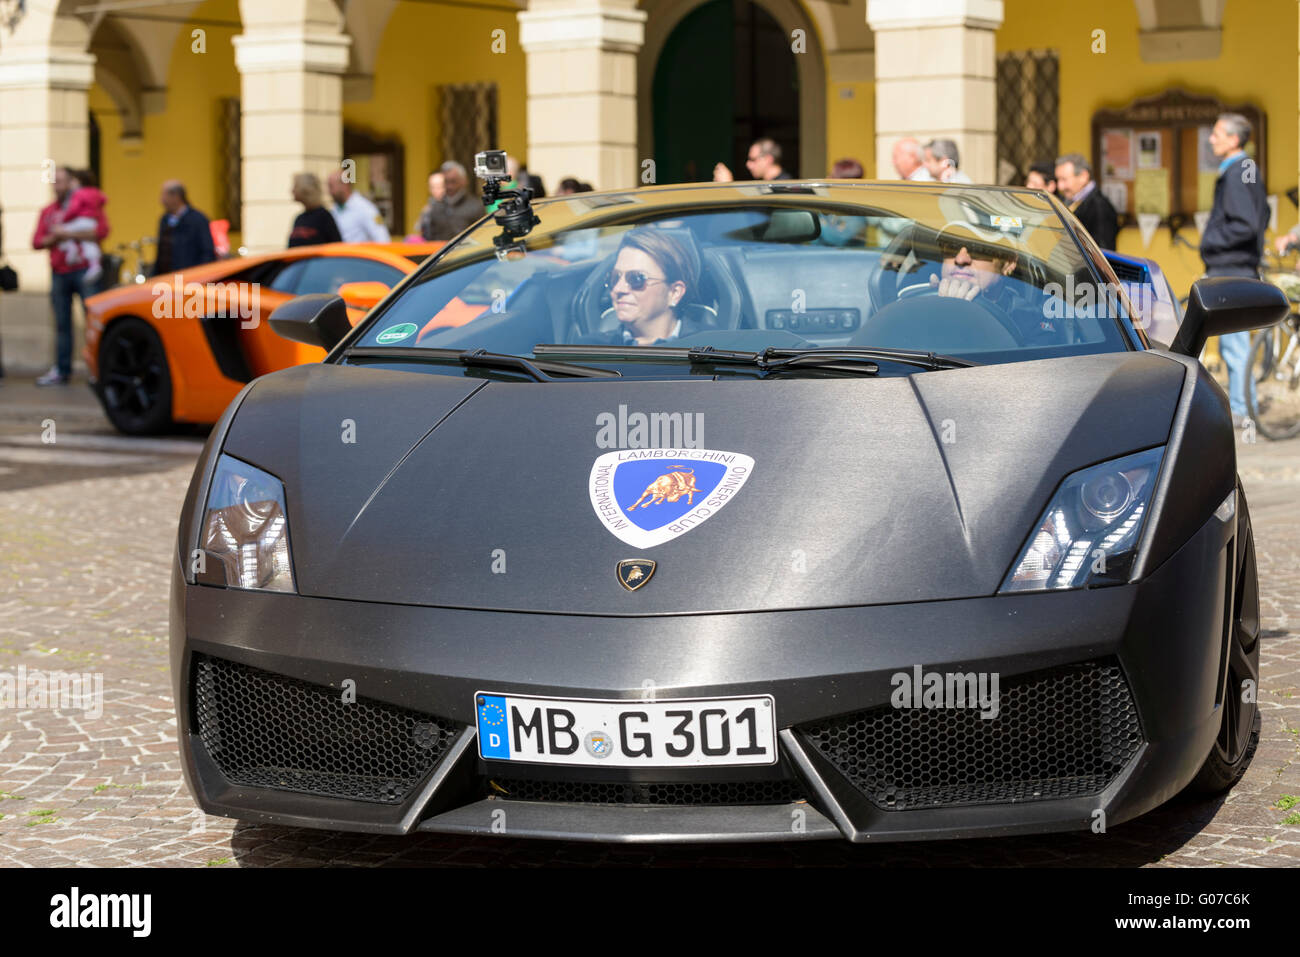 Sant'Agata Bolognese, Italy. 30th April, 2016. Lamborghini parade in front of the municipality of Sant'Agata Bolognese for the 100th Ferruccio Lamborghini Anniversary Stock Photo